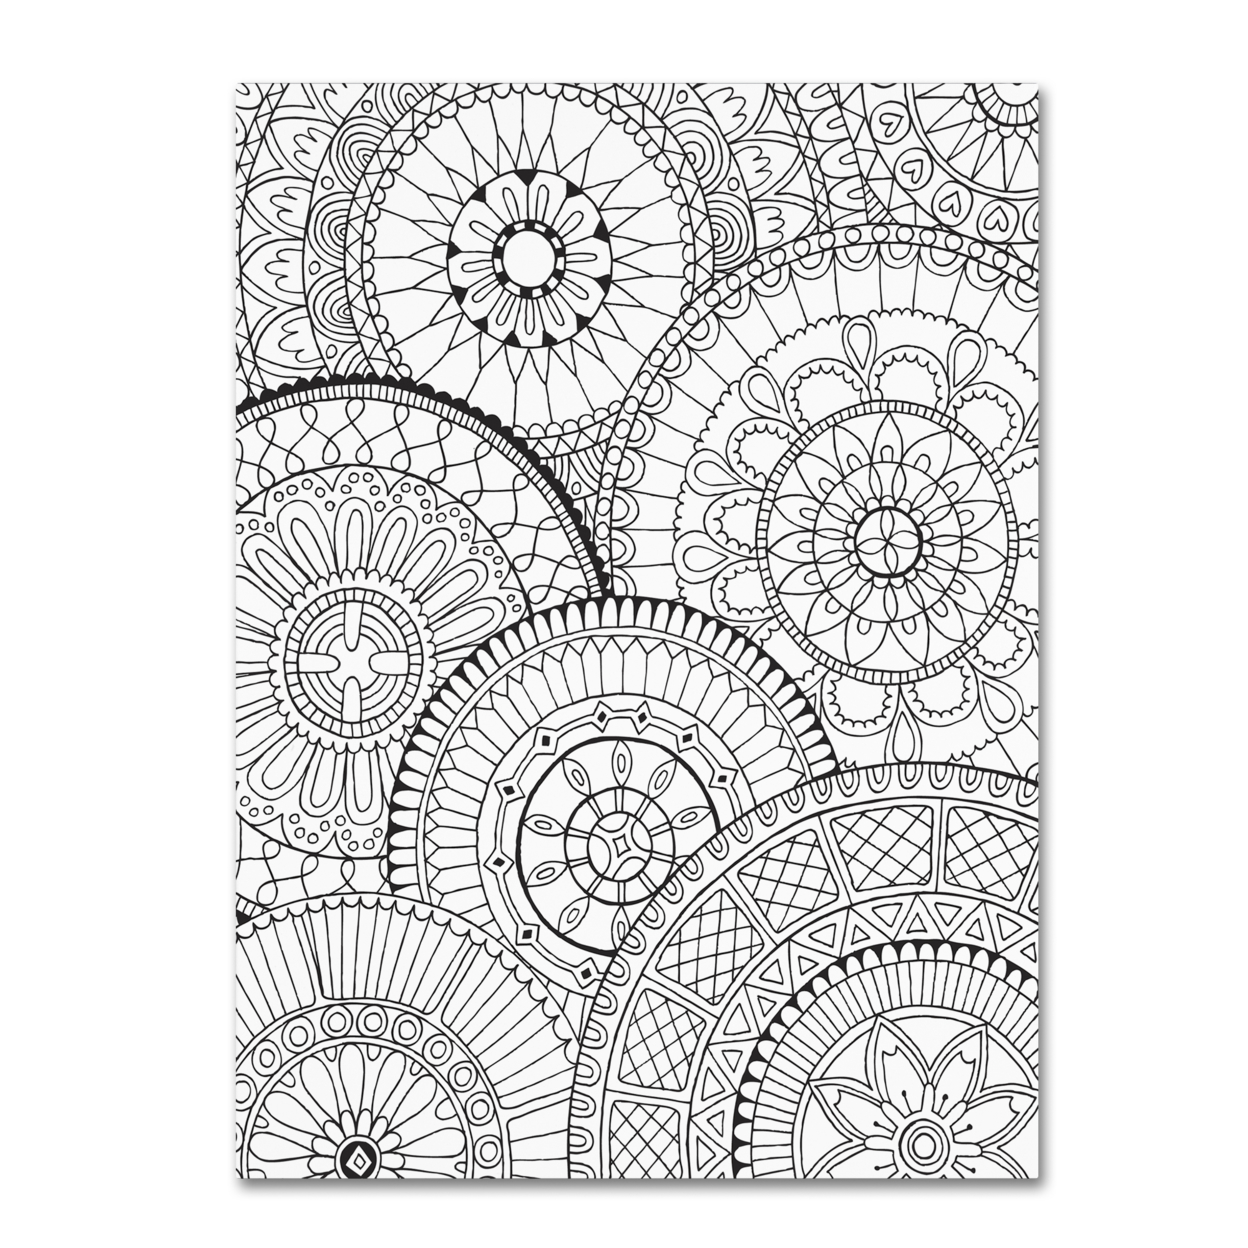 Hello Angel 'Page Of Mandalas' Canvas Wall Art 35 X 47 Inches